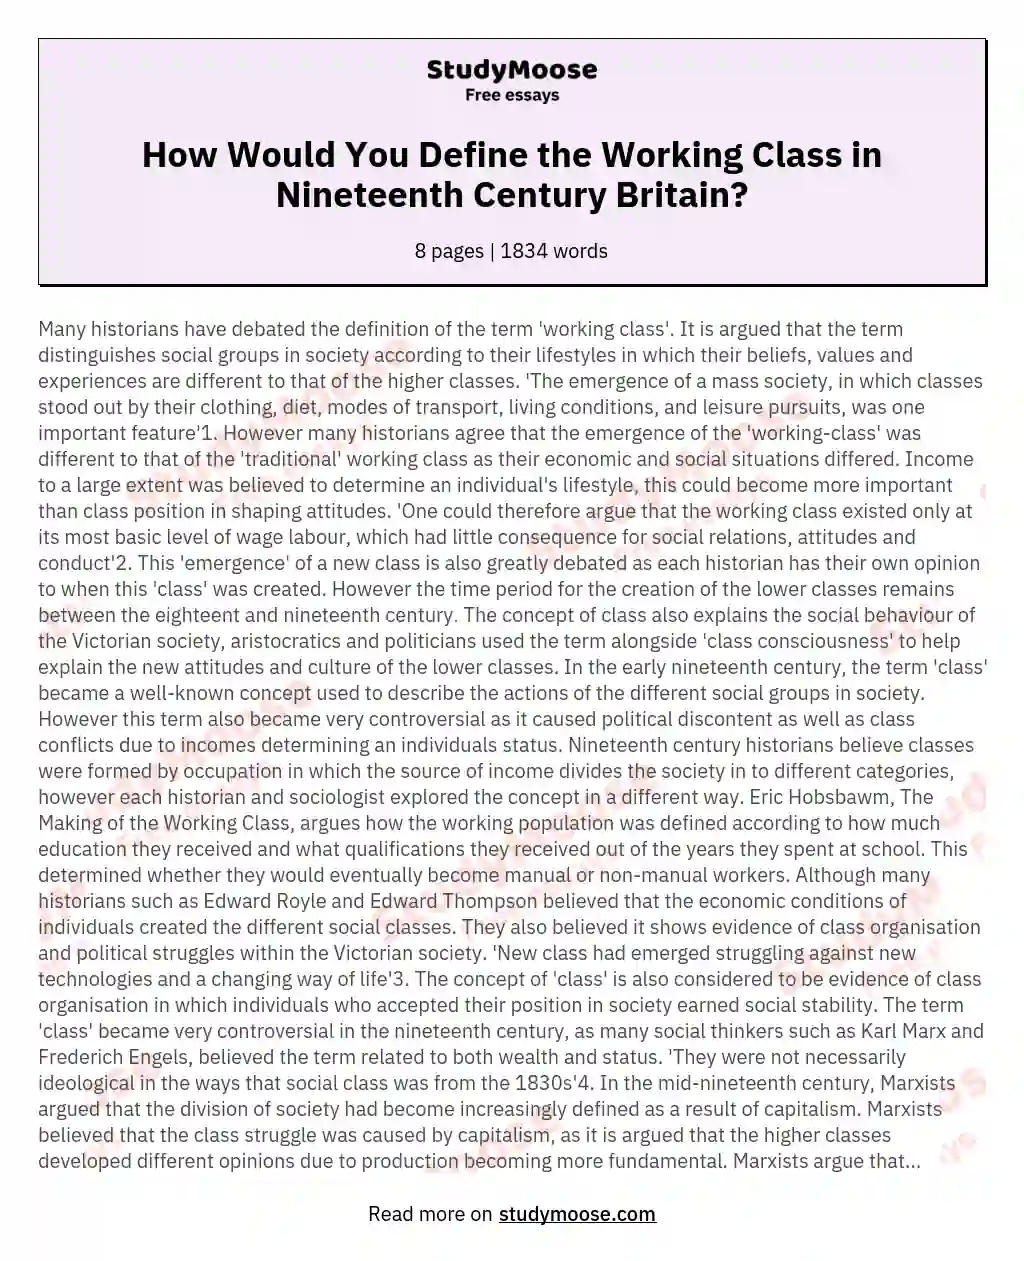 How Would You Define the Working Class in Nineteenth Century Britain?